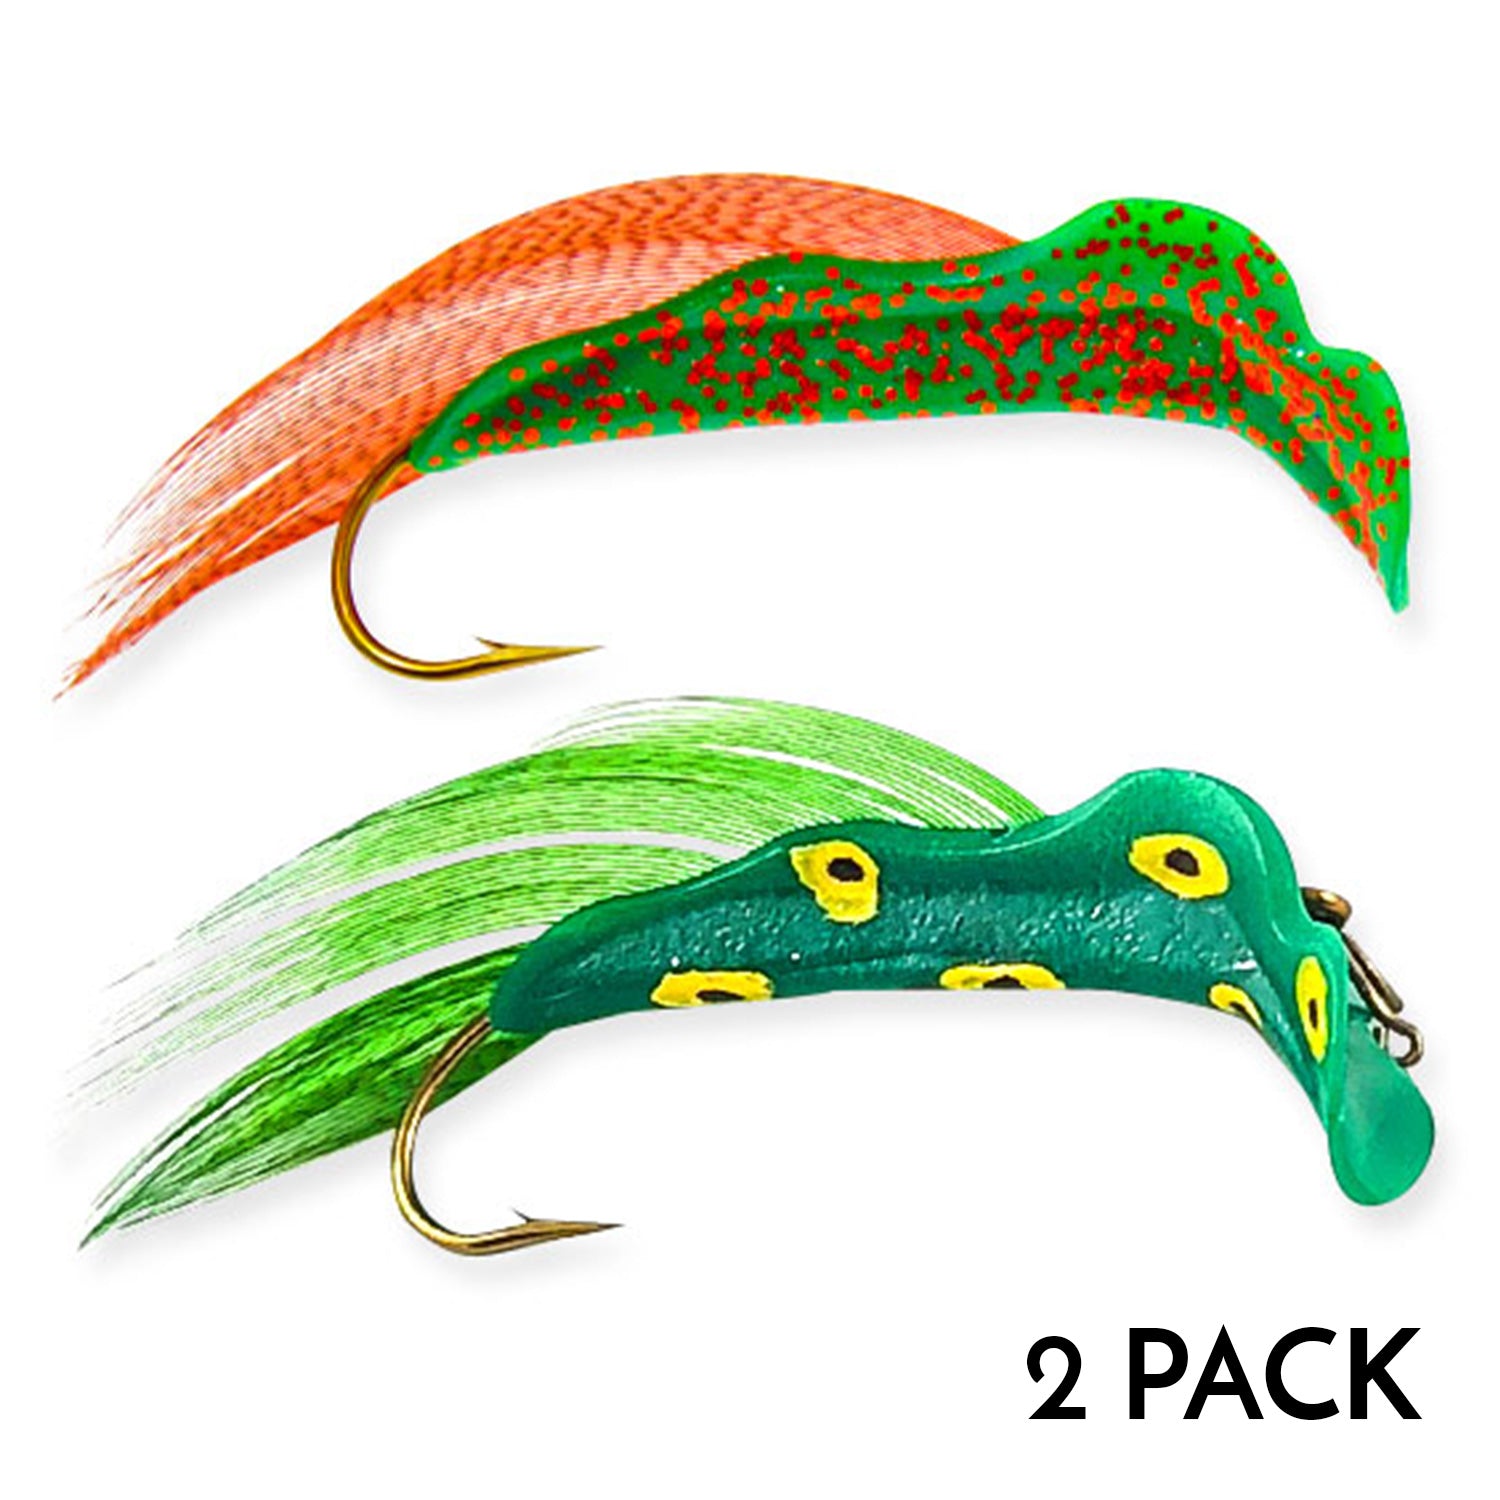 Bingo Bug - 2-Pack - Trout (General - All Purpose) Combo – Lucky Bug Lures